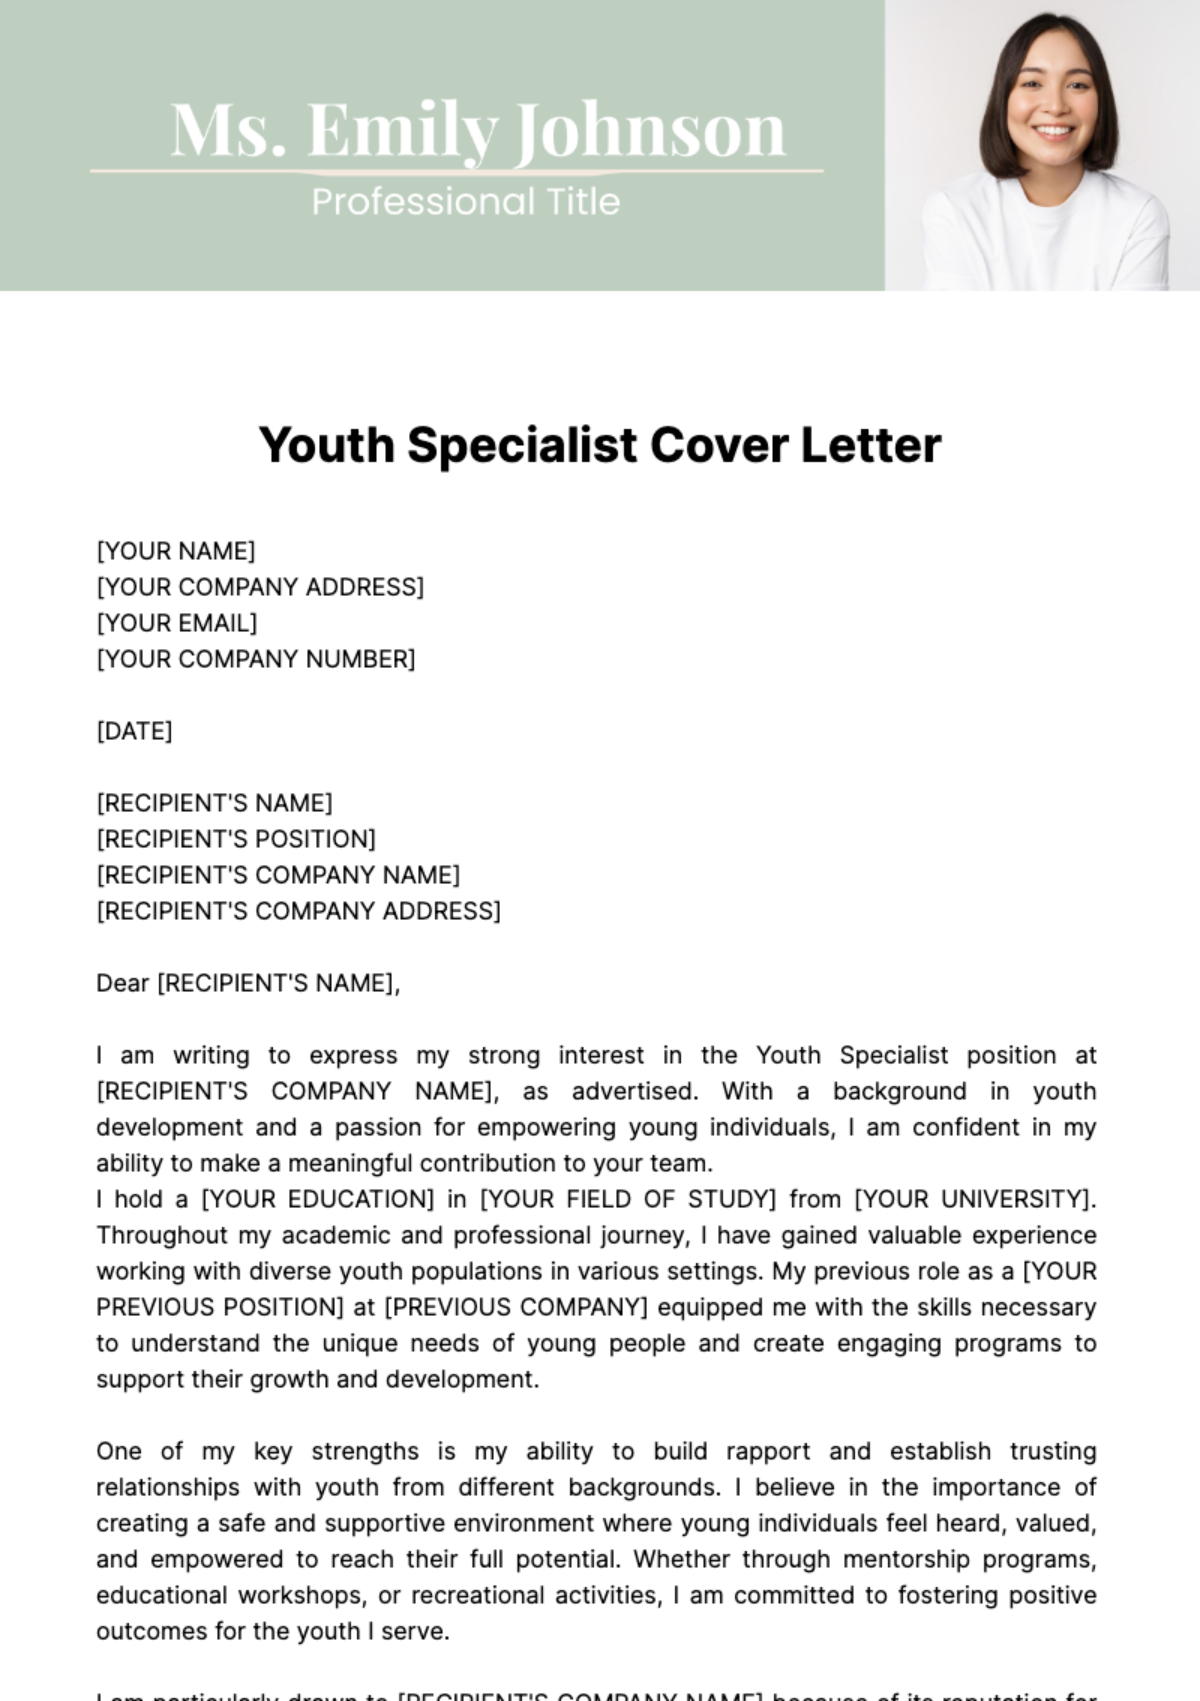 Youth Specialist Cover Letter Template